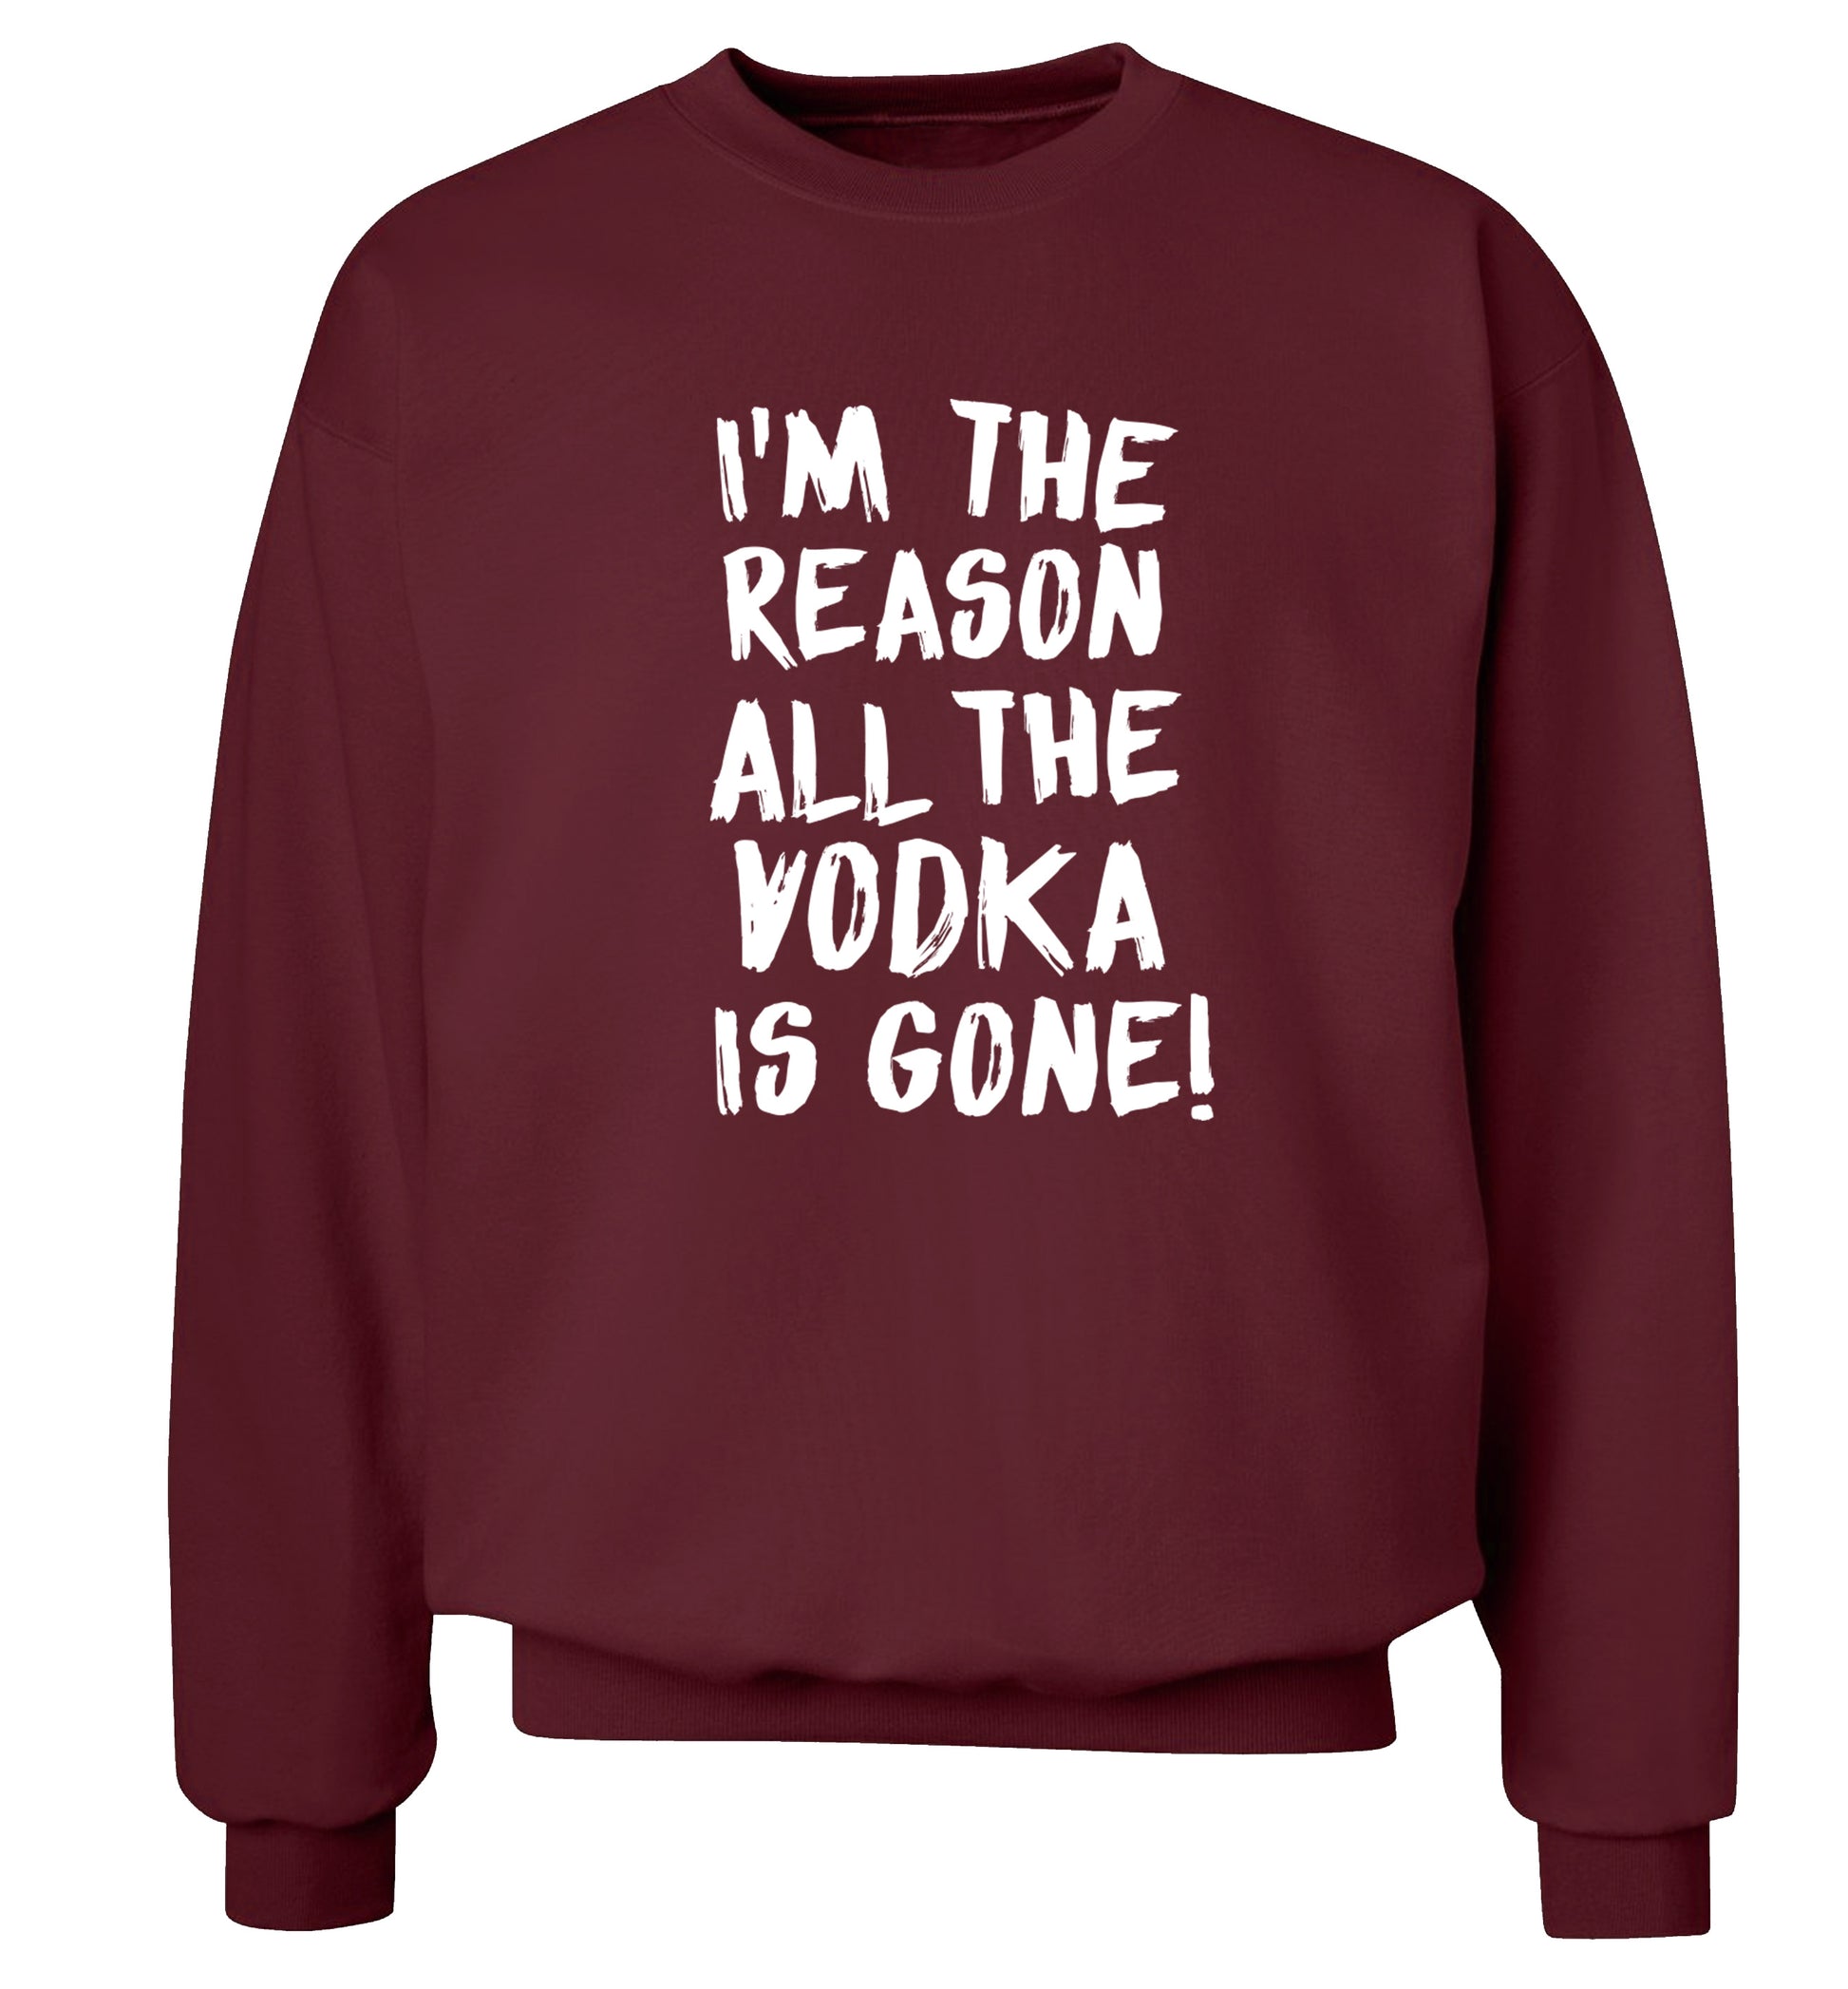 I'm the reason all the tequila is gone Adult's unisex maroon Sweater 2XL